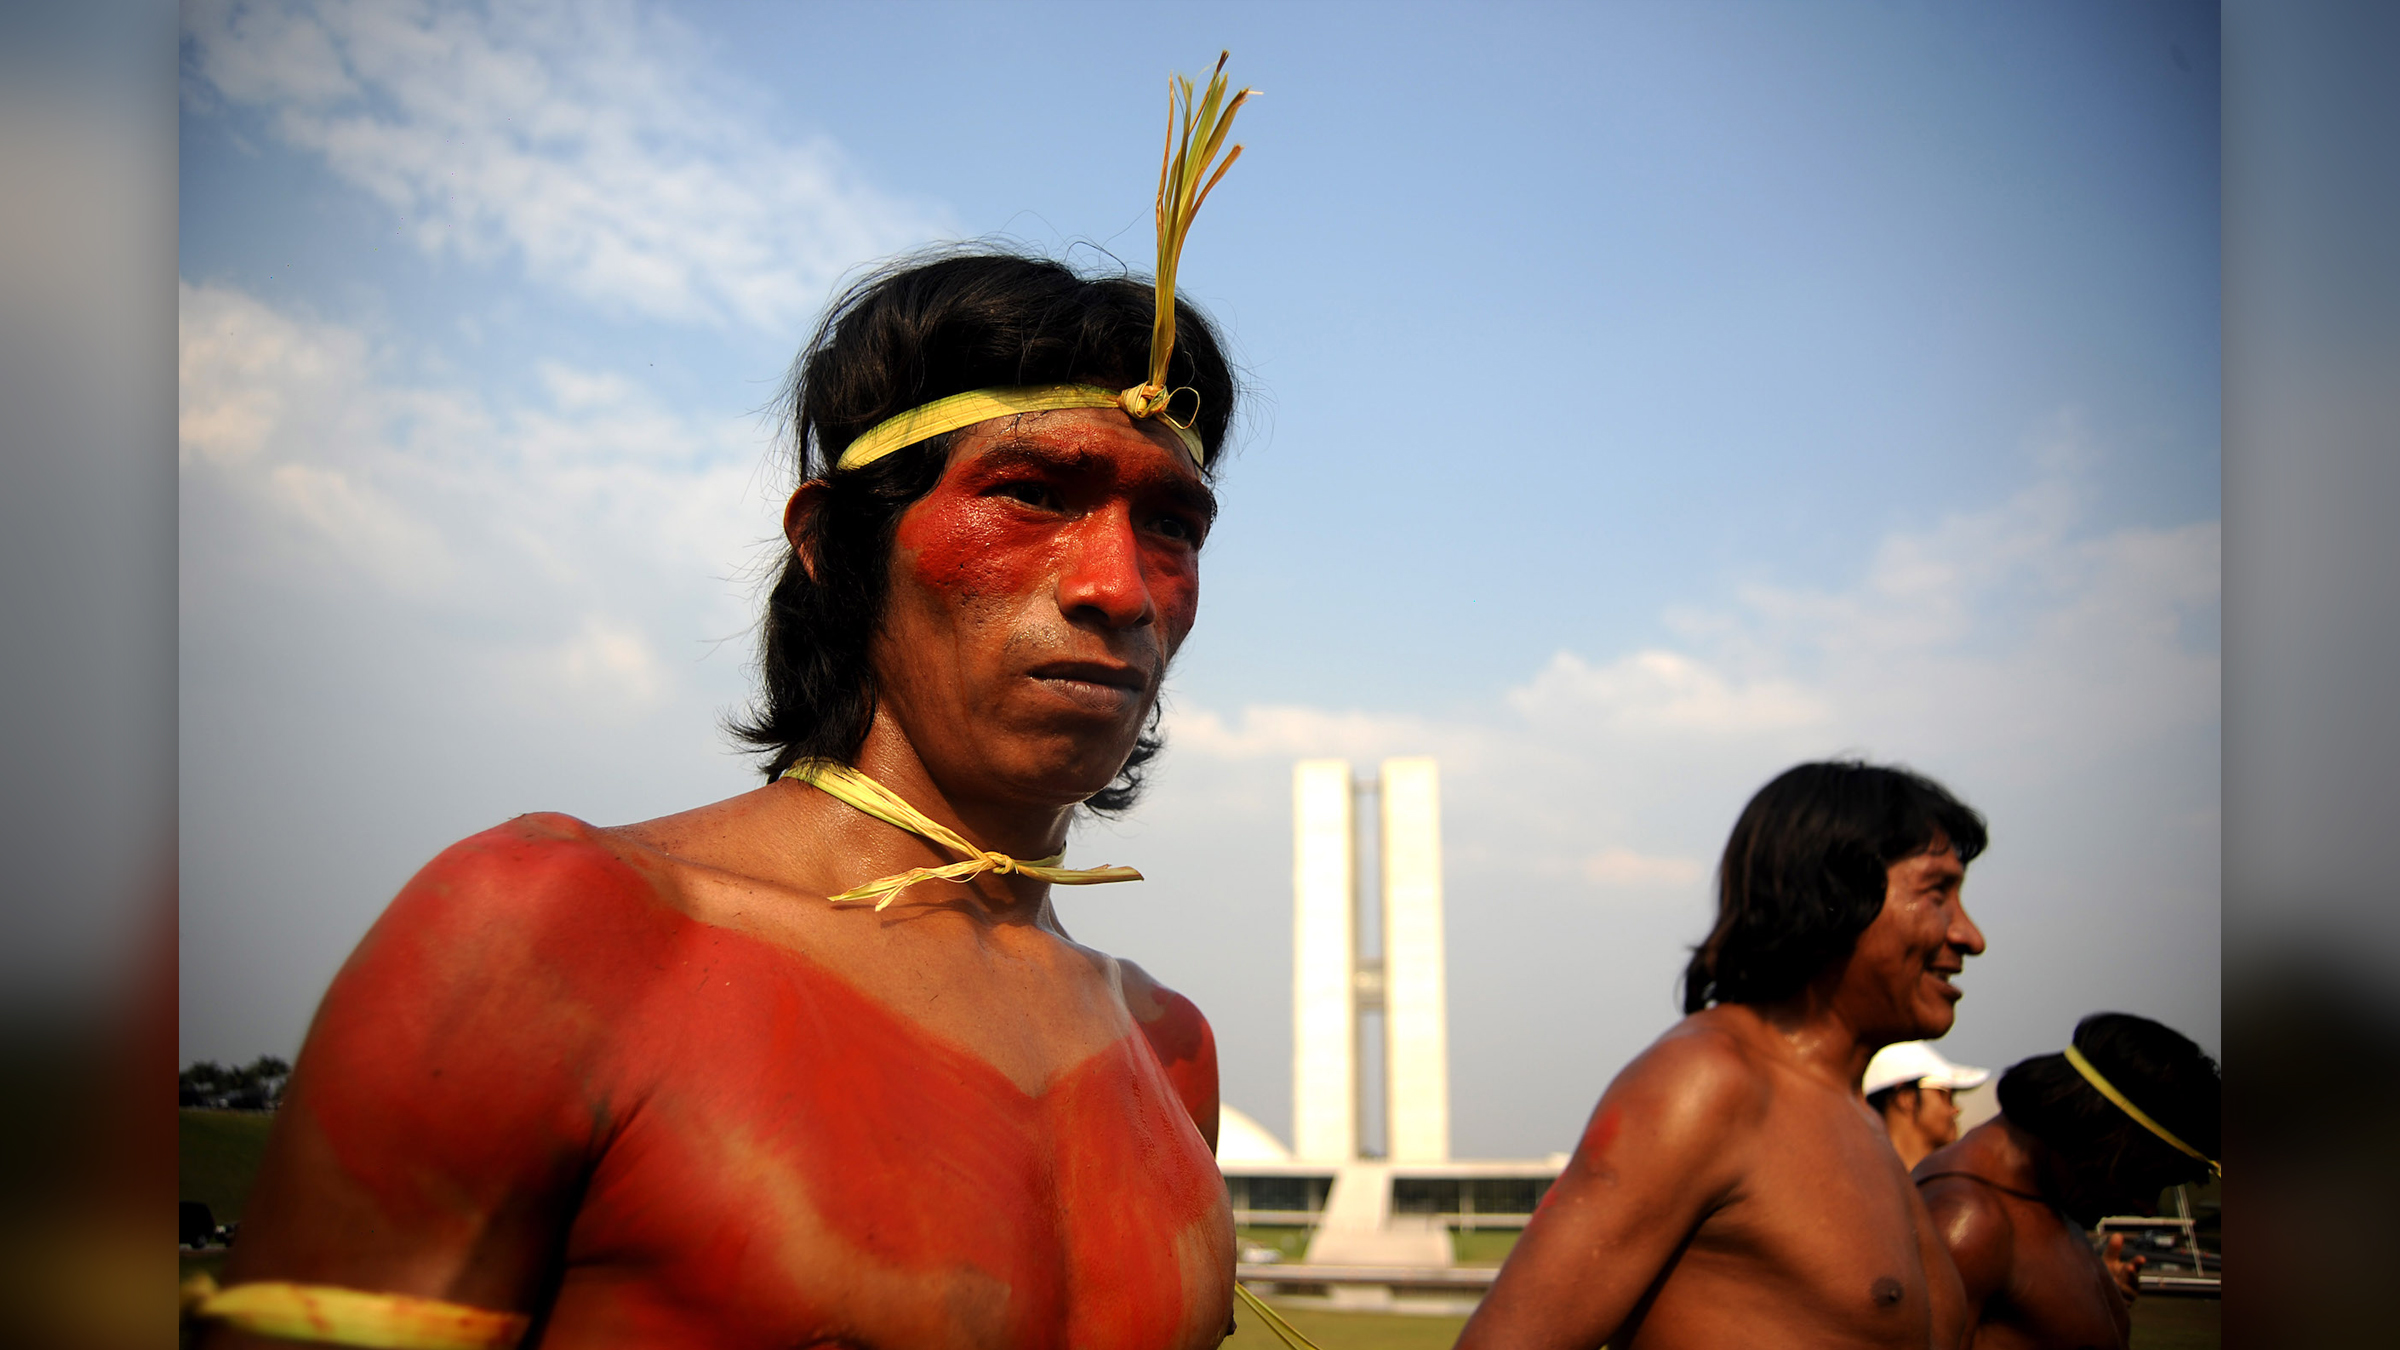 A Xavánte man in Brazil, just after the traditional logs race that was part of the Native Peoples Meeting in September 2012. The Xavánte people were included in a new study about the genetic connection between people in South America and Oceana.